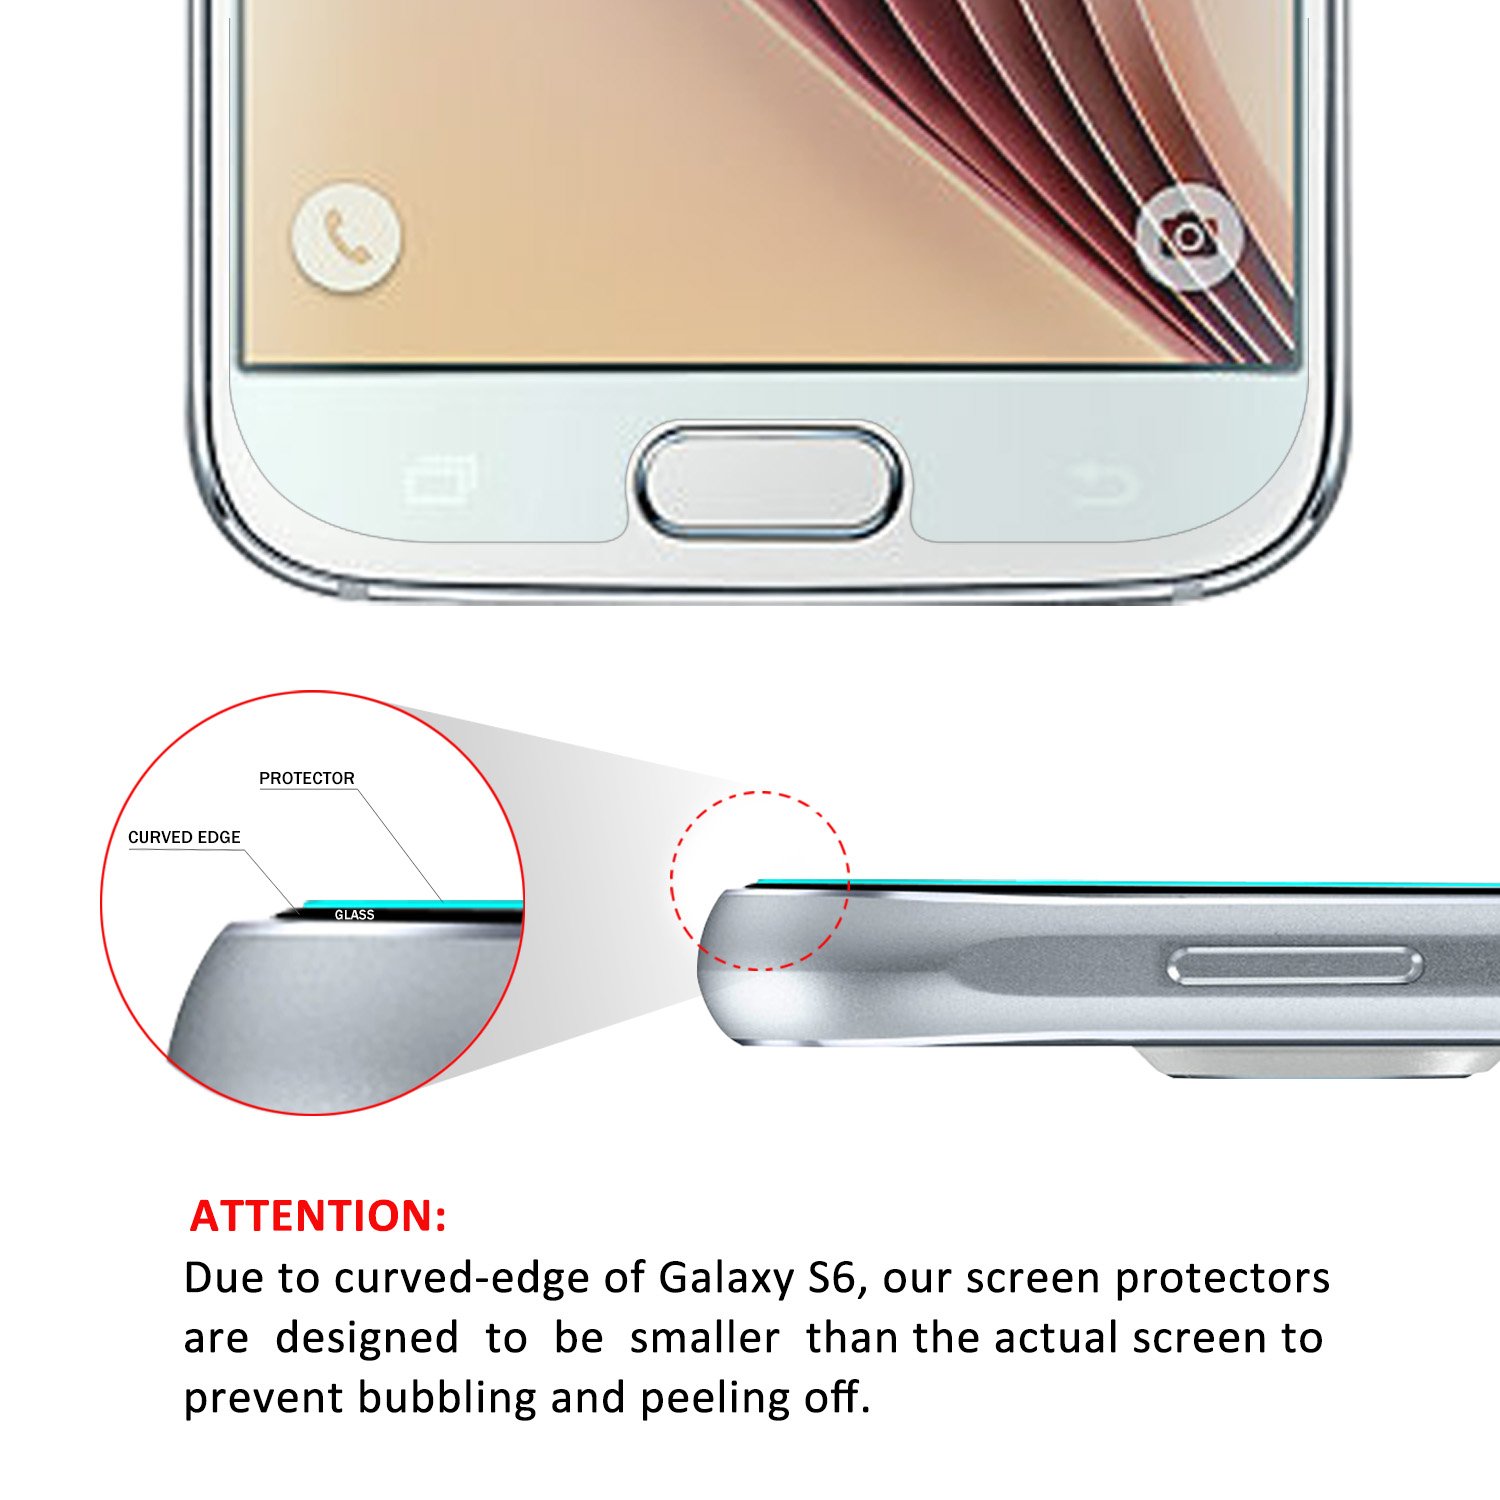 amFilm Glass Screen Protector for Galaxy S6, Tempered Glass, with complimentary PET Back Film